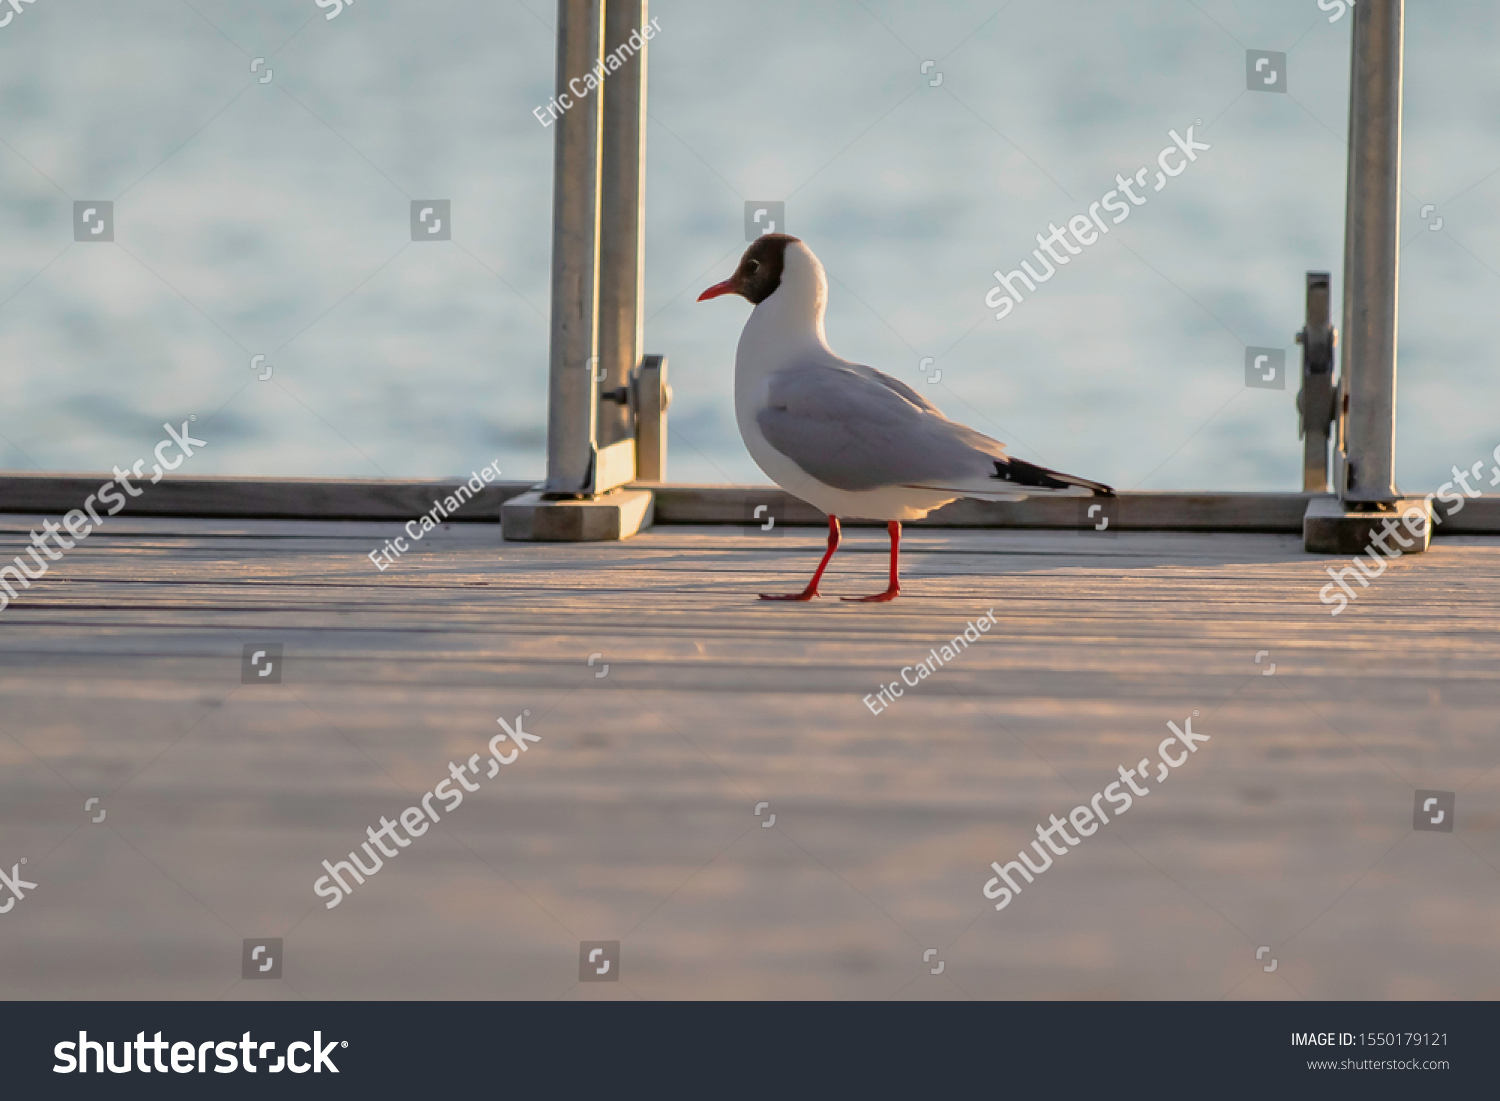 Black Headed Gull takes a break from fishing on a dock in the Archipelago of Finland. #1550179121